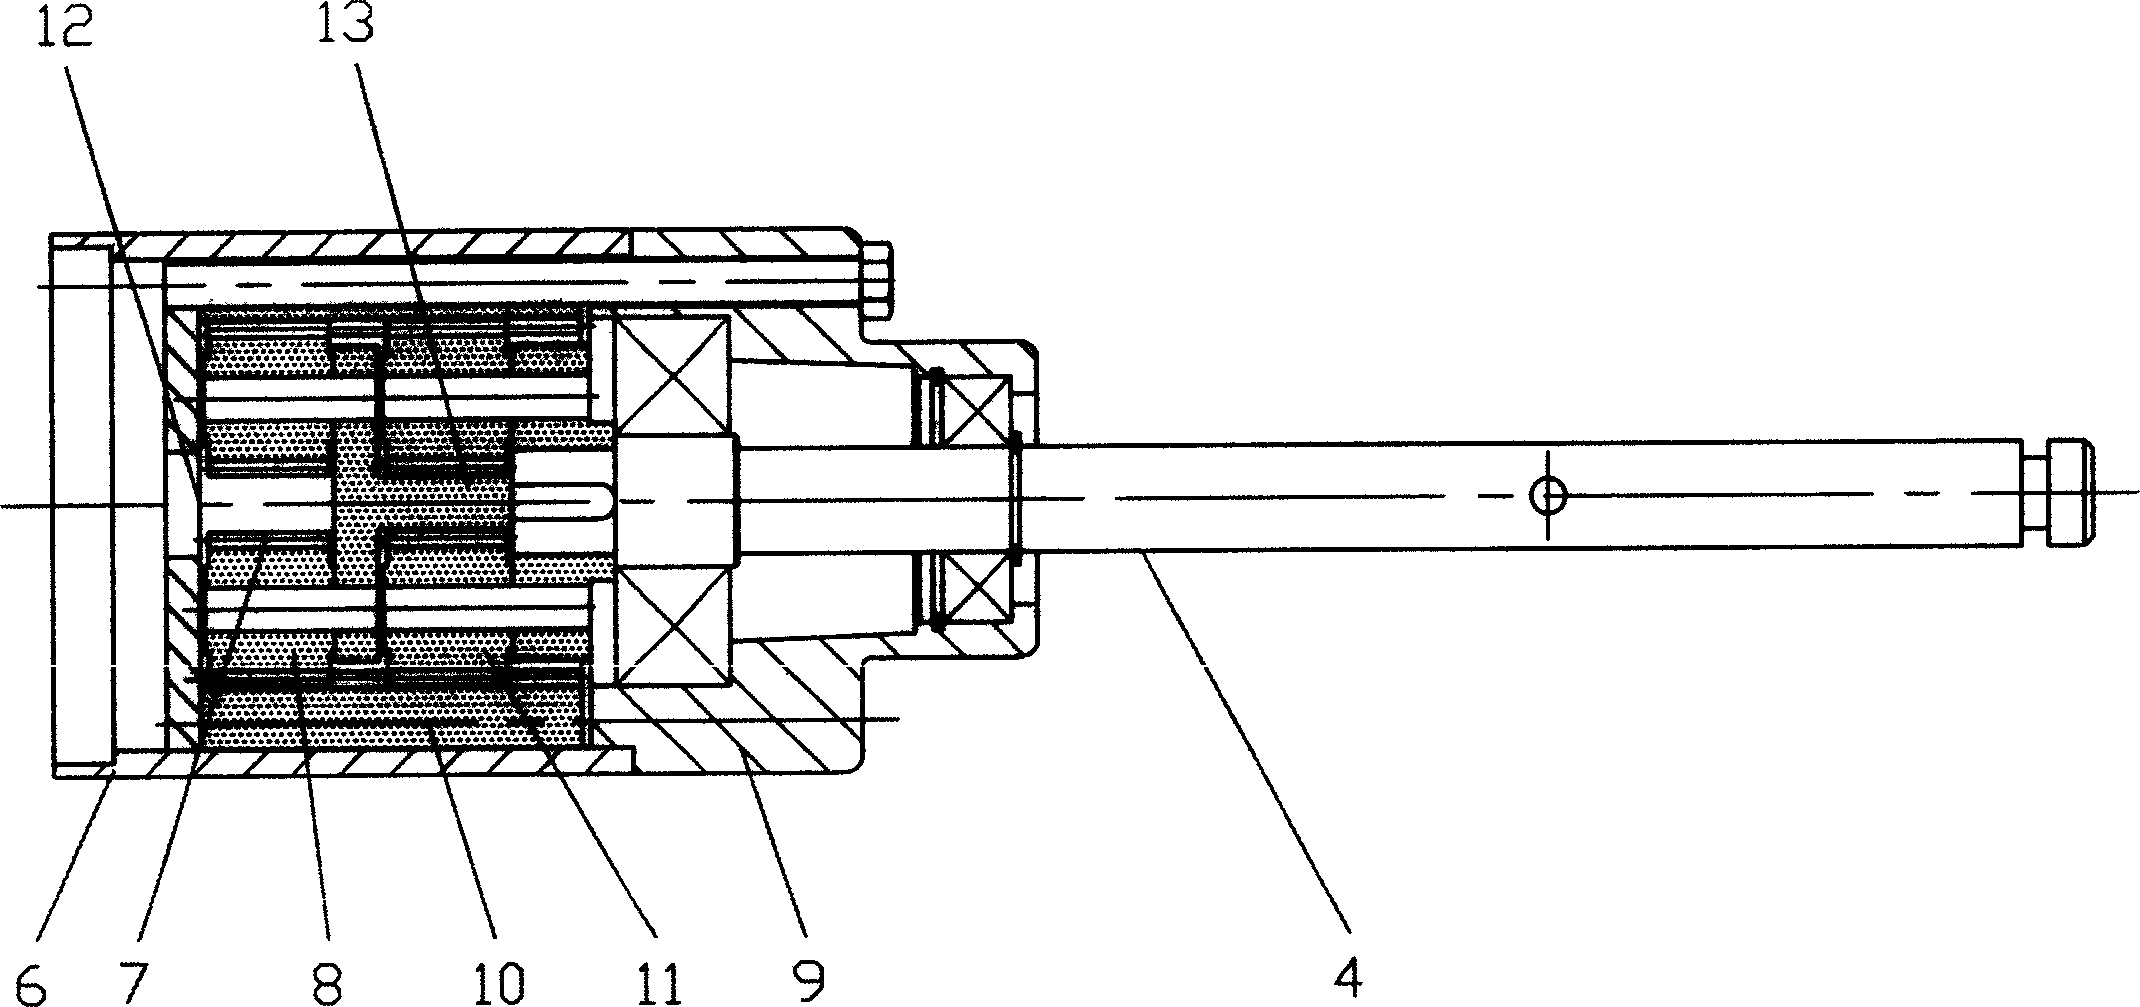 Motor with two-end output